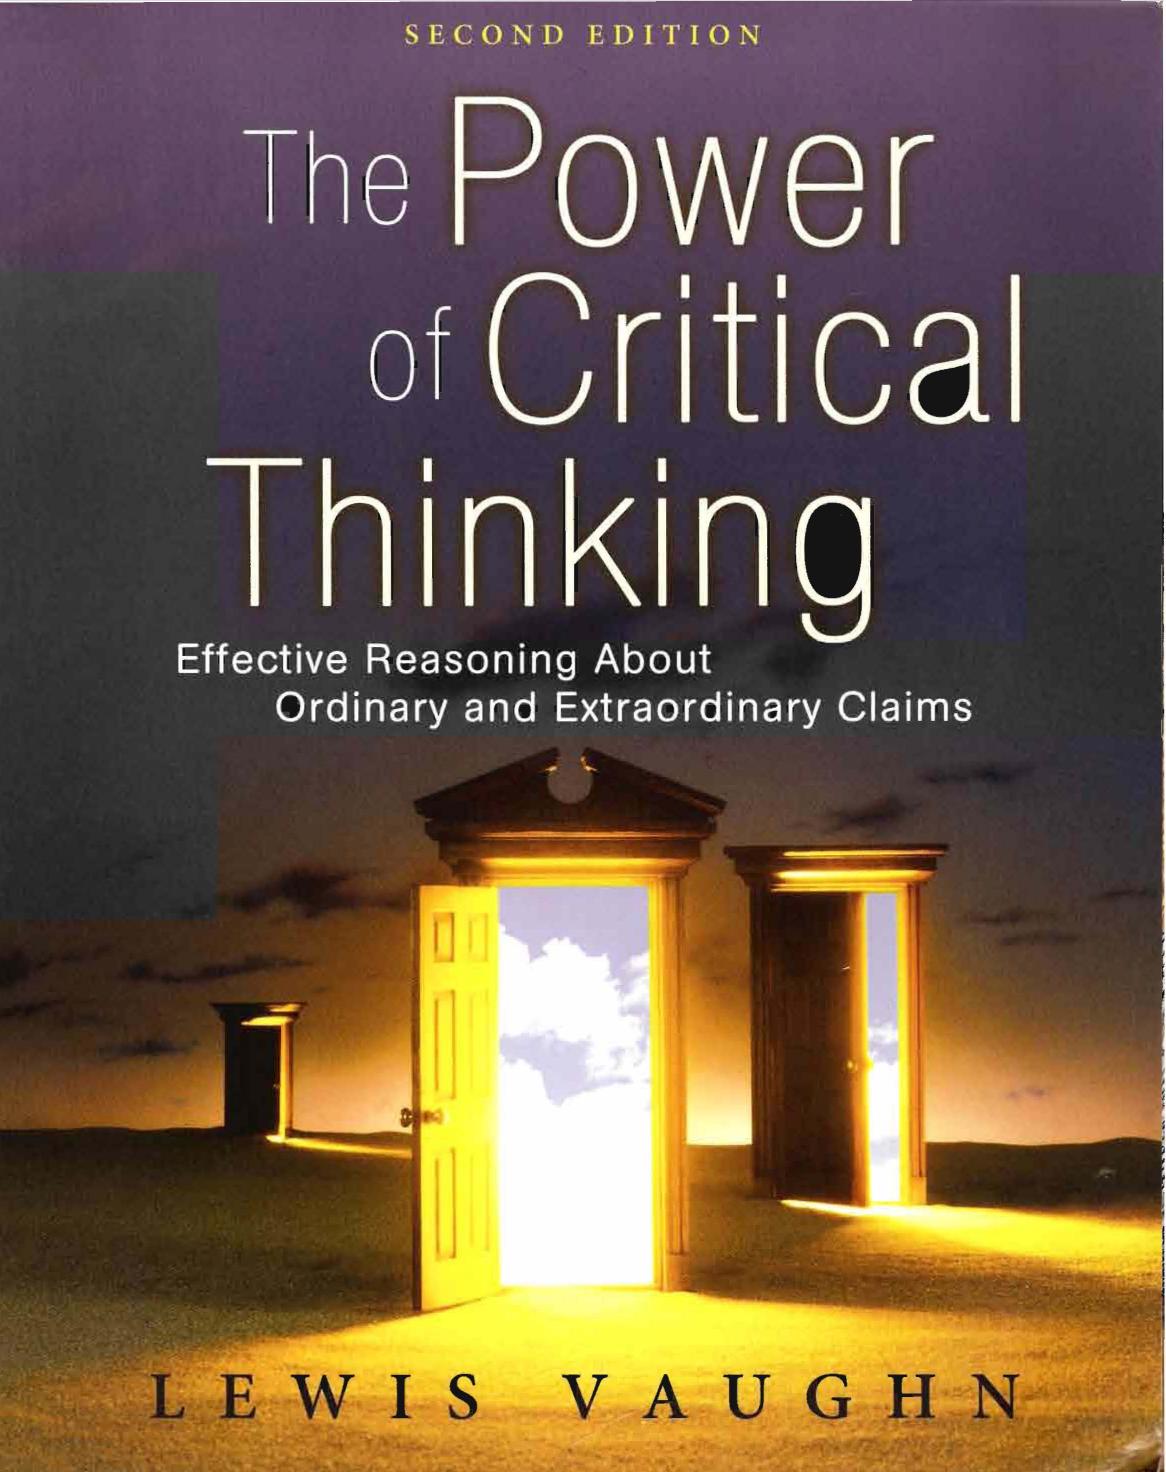 The Power of Critical Thinking: Effective Reasoning About Ordinary and Extraordinary Claims - Second Edition